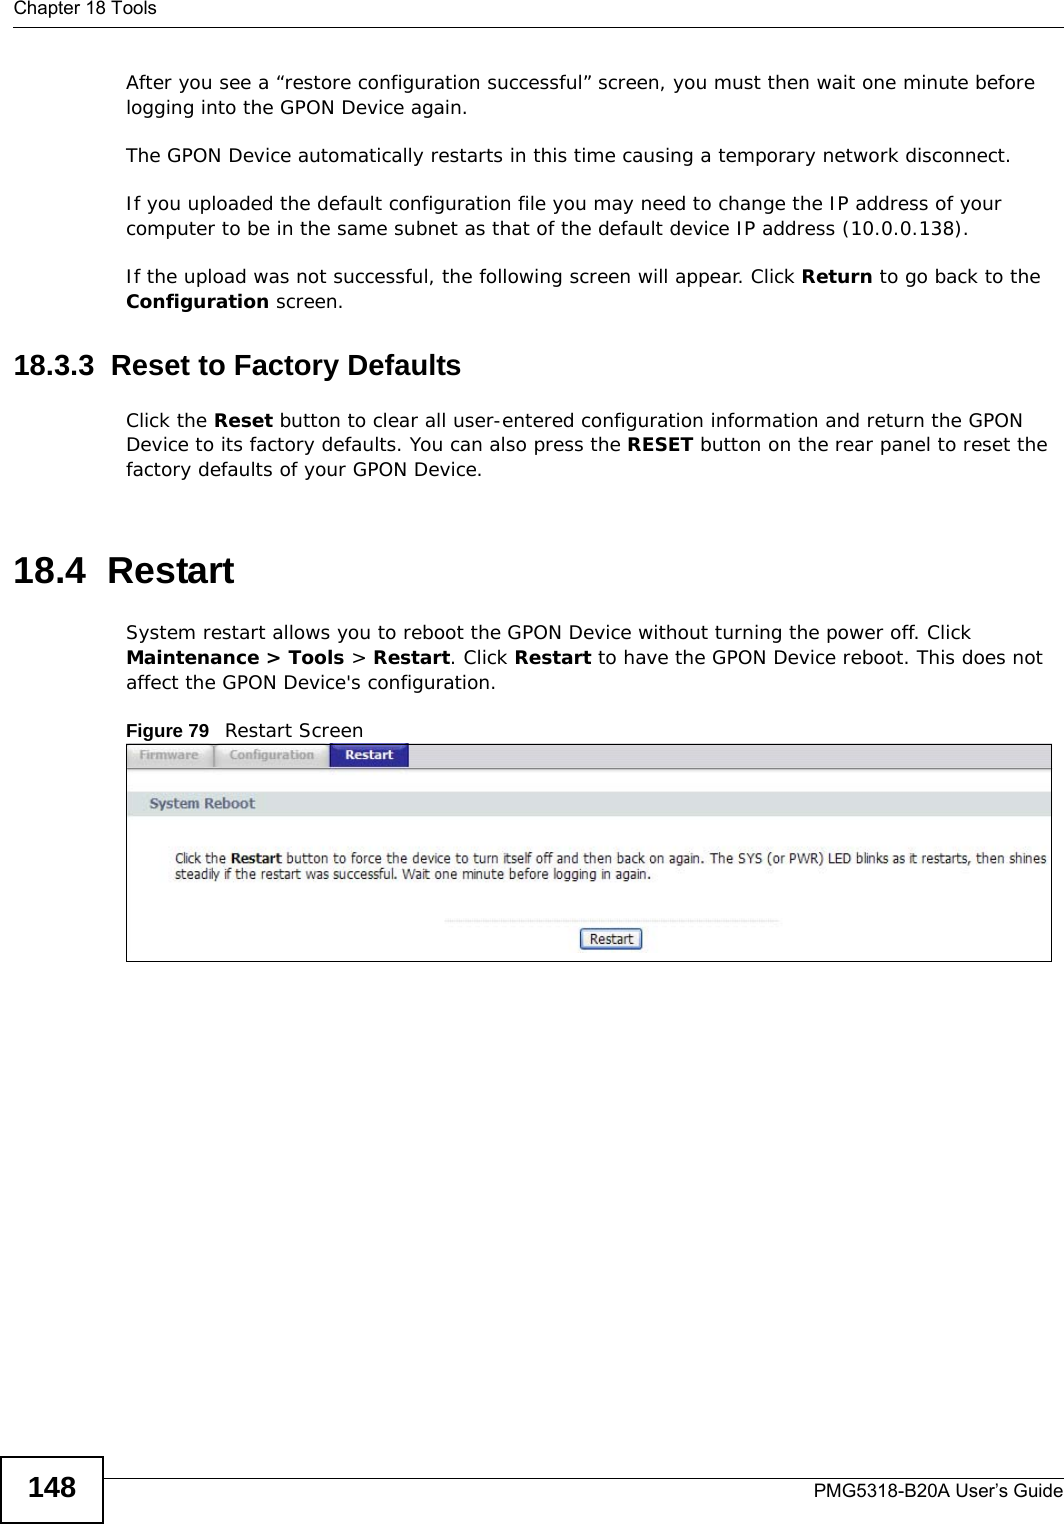 Chapter 18 ToolsPMG5318-B20A User’s Guide148After you see a “restore configuration successful” screen, you must then wait one minute before logging into the GPON Device again. The GPON Device automatically restarts in this time causing a temporary network disconnect. If you uploaded the default configuration file you may need to change the IP address of your computer to be in the same subnet as that of the default device IP address (10.0.0.138). If the upload was not successful, the following screen will appear. Click Return to go back to the Configuration screen. 18.3.3  Reset to Factory Defaults  Click the Reset button to clear all user-entered configuration information and return the GPON Device to its factory defaults. You can also press the RESET button on the rear panel to reset the factory defaults of your GPON Device.18.4  Restart System restart allows you to reboot the GPON Device without turning the power off. Click Maintenance &gt; Tools &gt; Restart. Click Restart to have the GPON Device reboot. This does not affect the GPON Device&apos;s configuration. Figure 79   Restart Screen